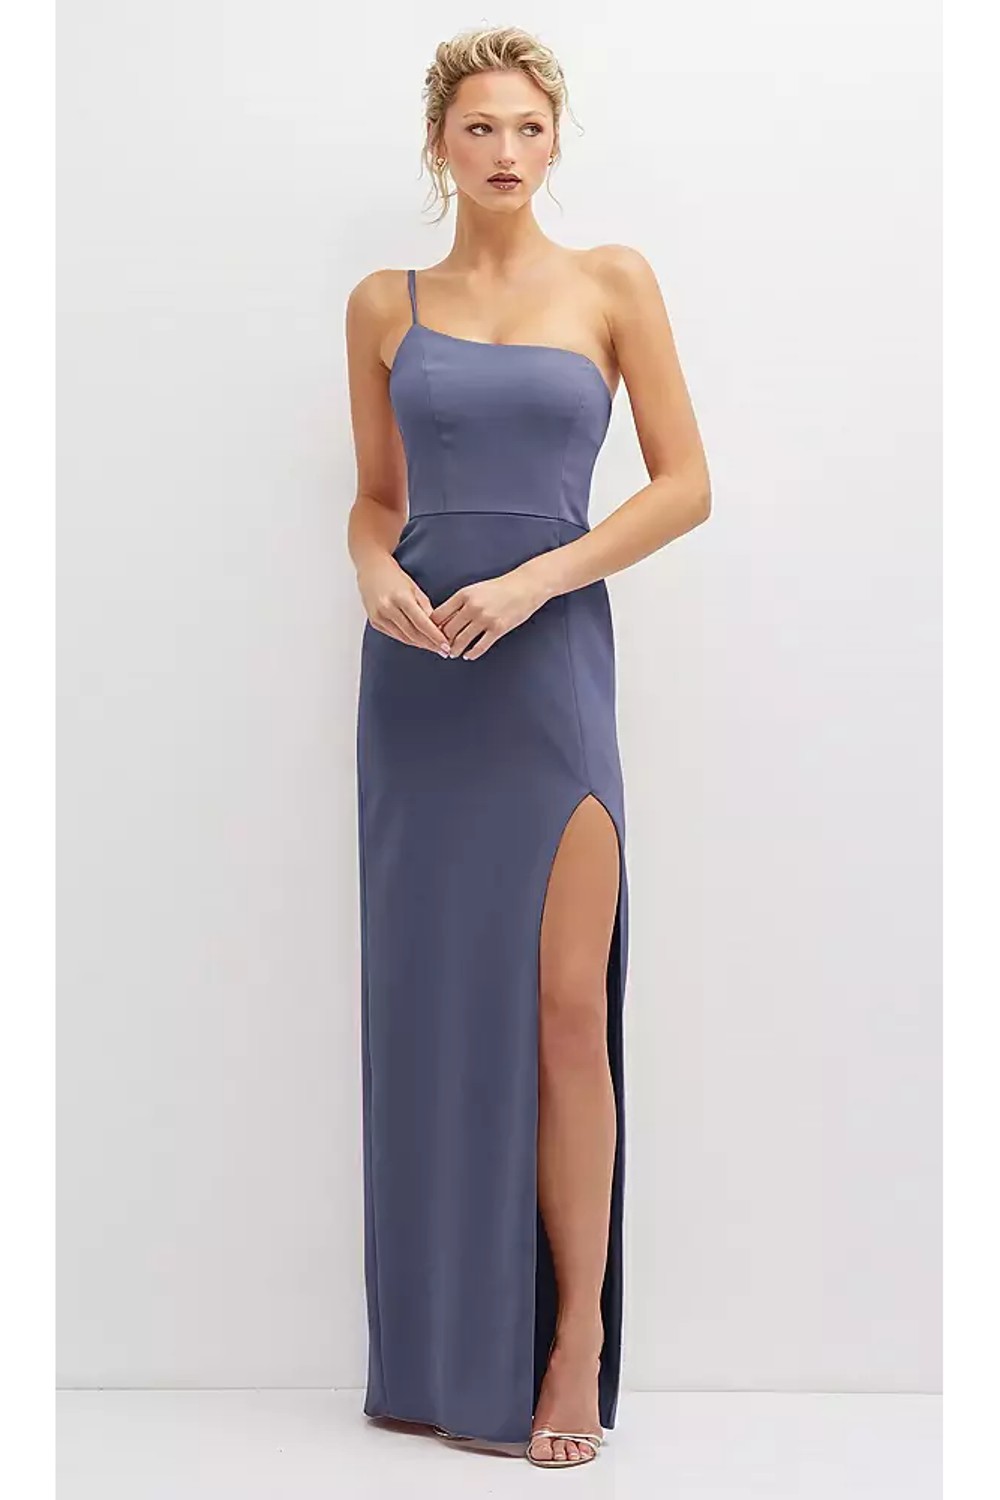 Try Before You Buy Aspen Bridesmaid Dress by Dessy